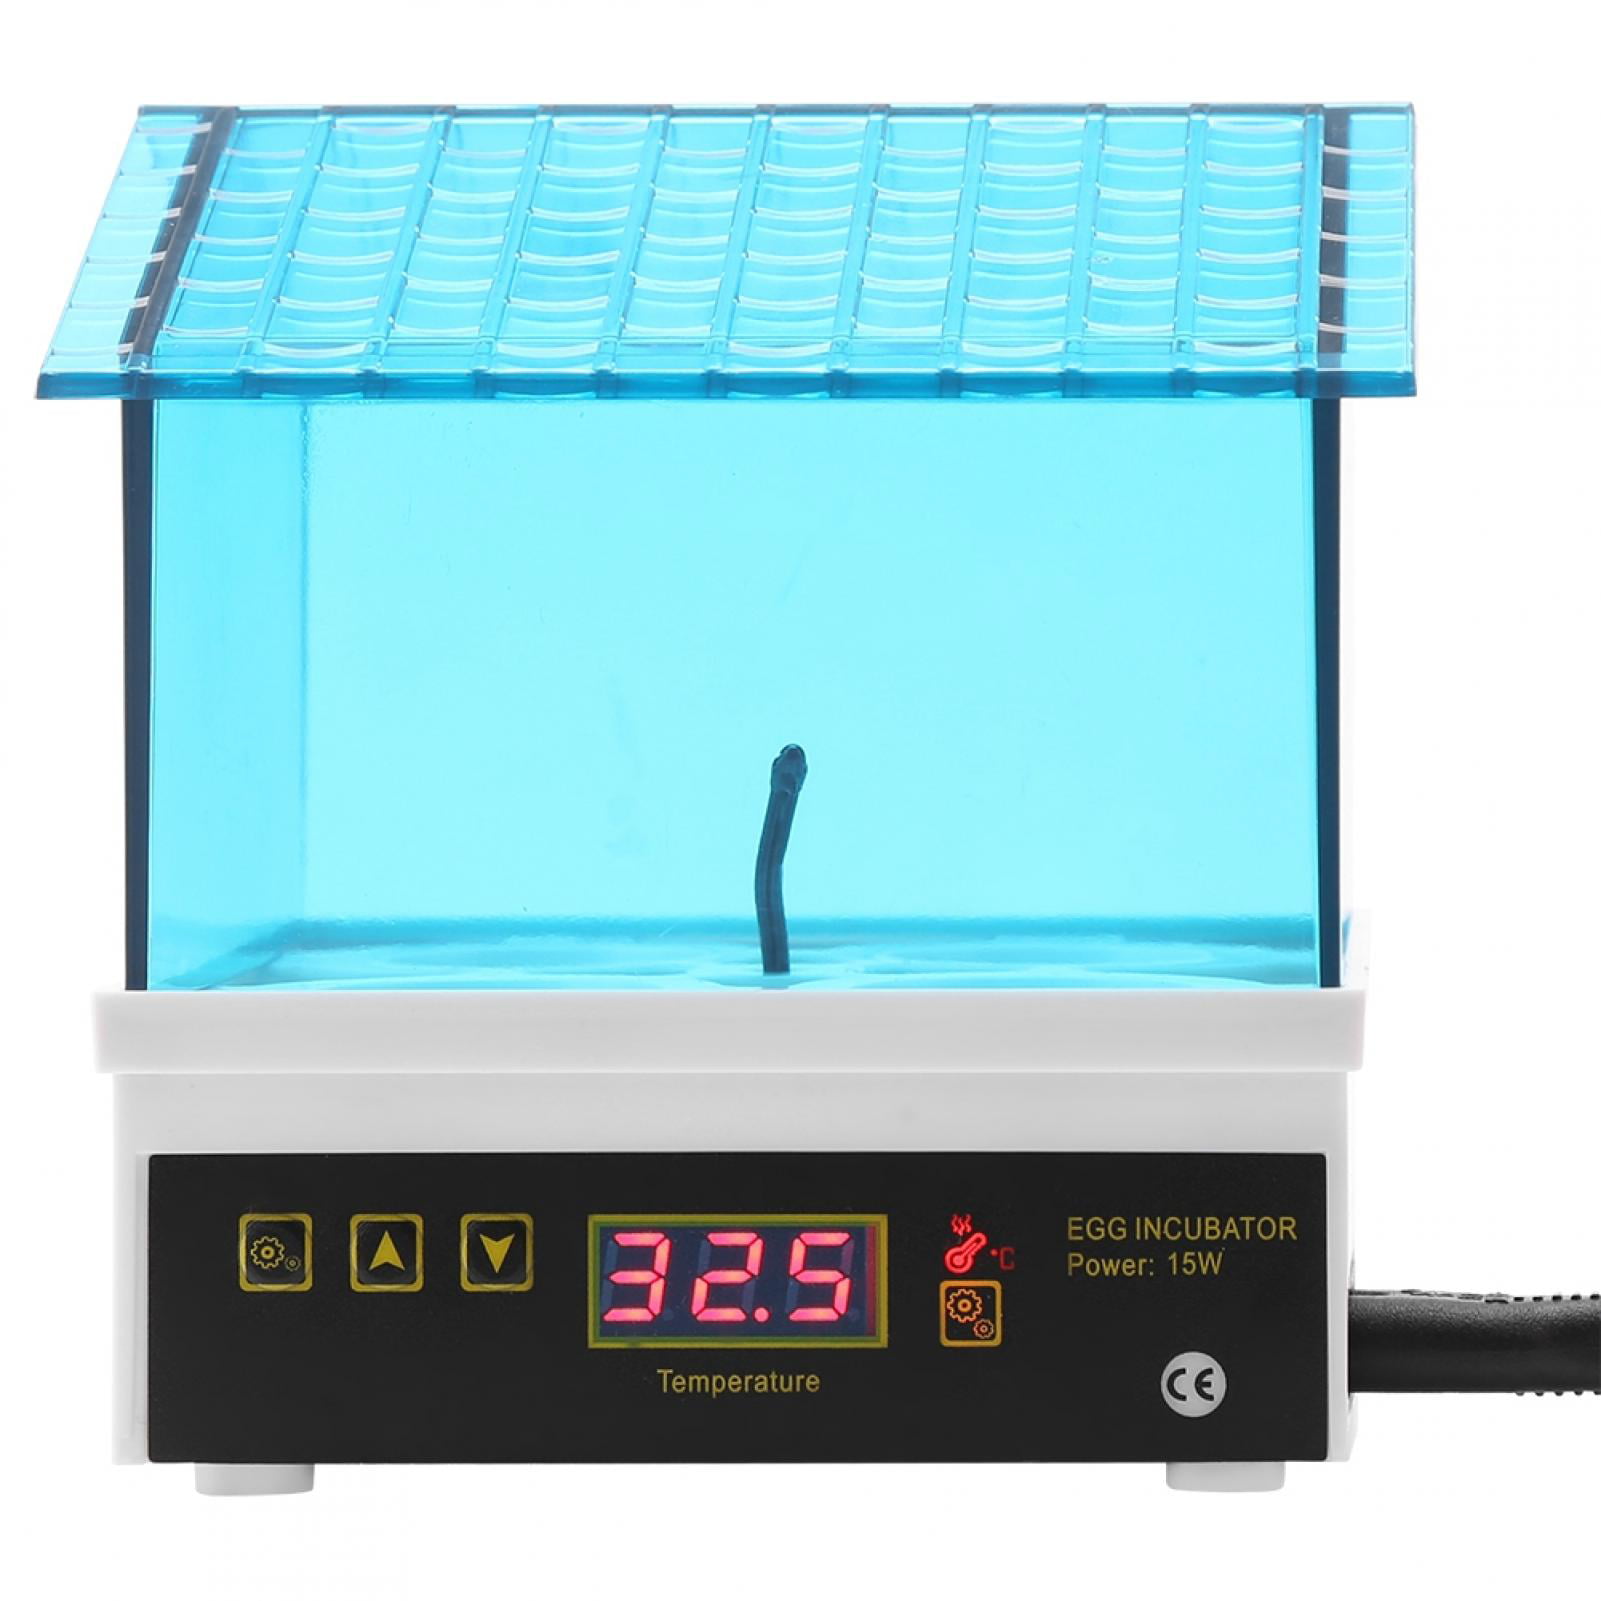 4 Eggs Incubator Digital Incubator for Chicken Eggs Poultry Hatching Machine Clear General Purpose Incubator with Temperature Control for Chicken Chick Duck US Plug 95V‑125V 